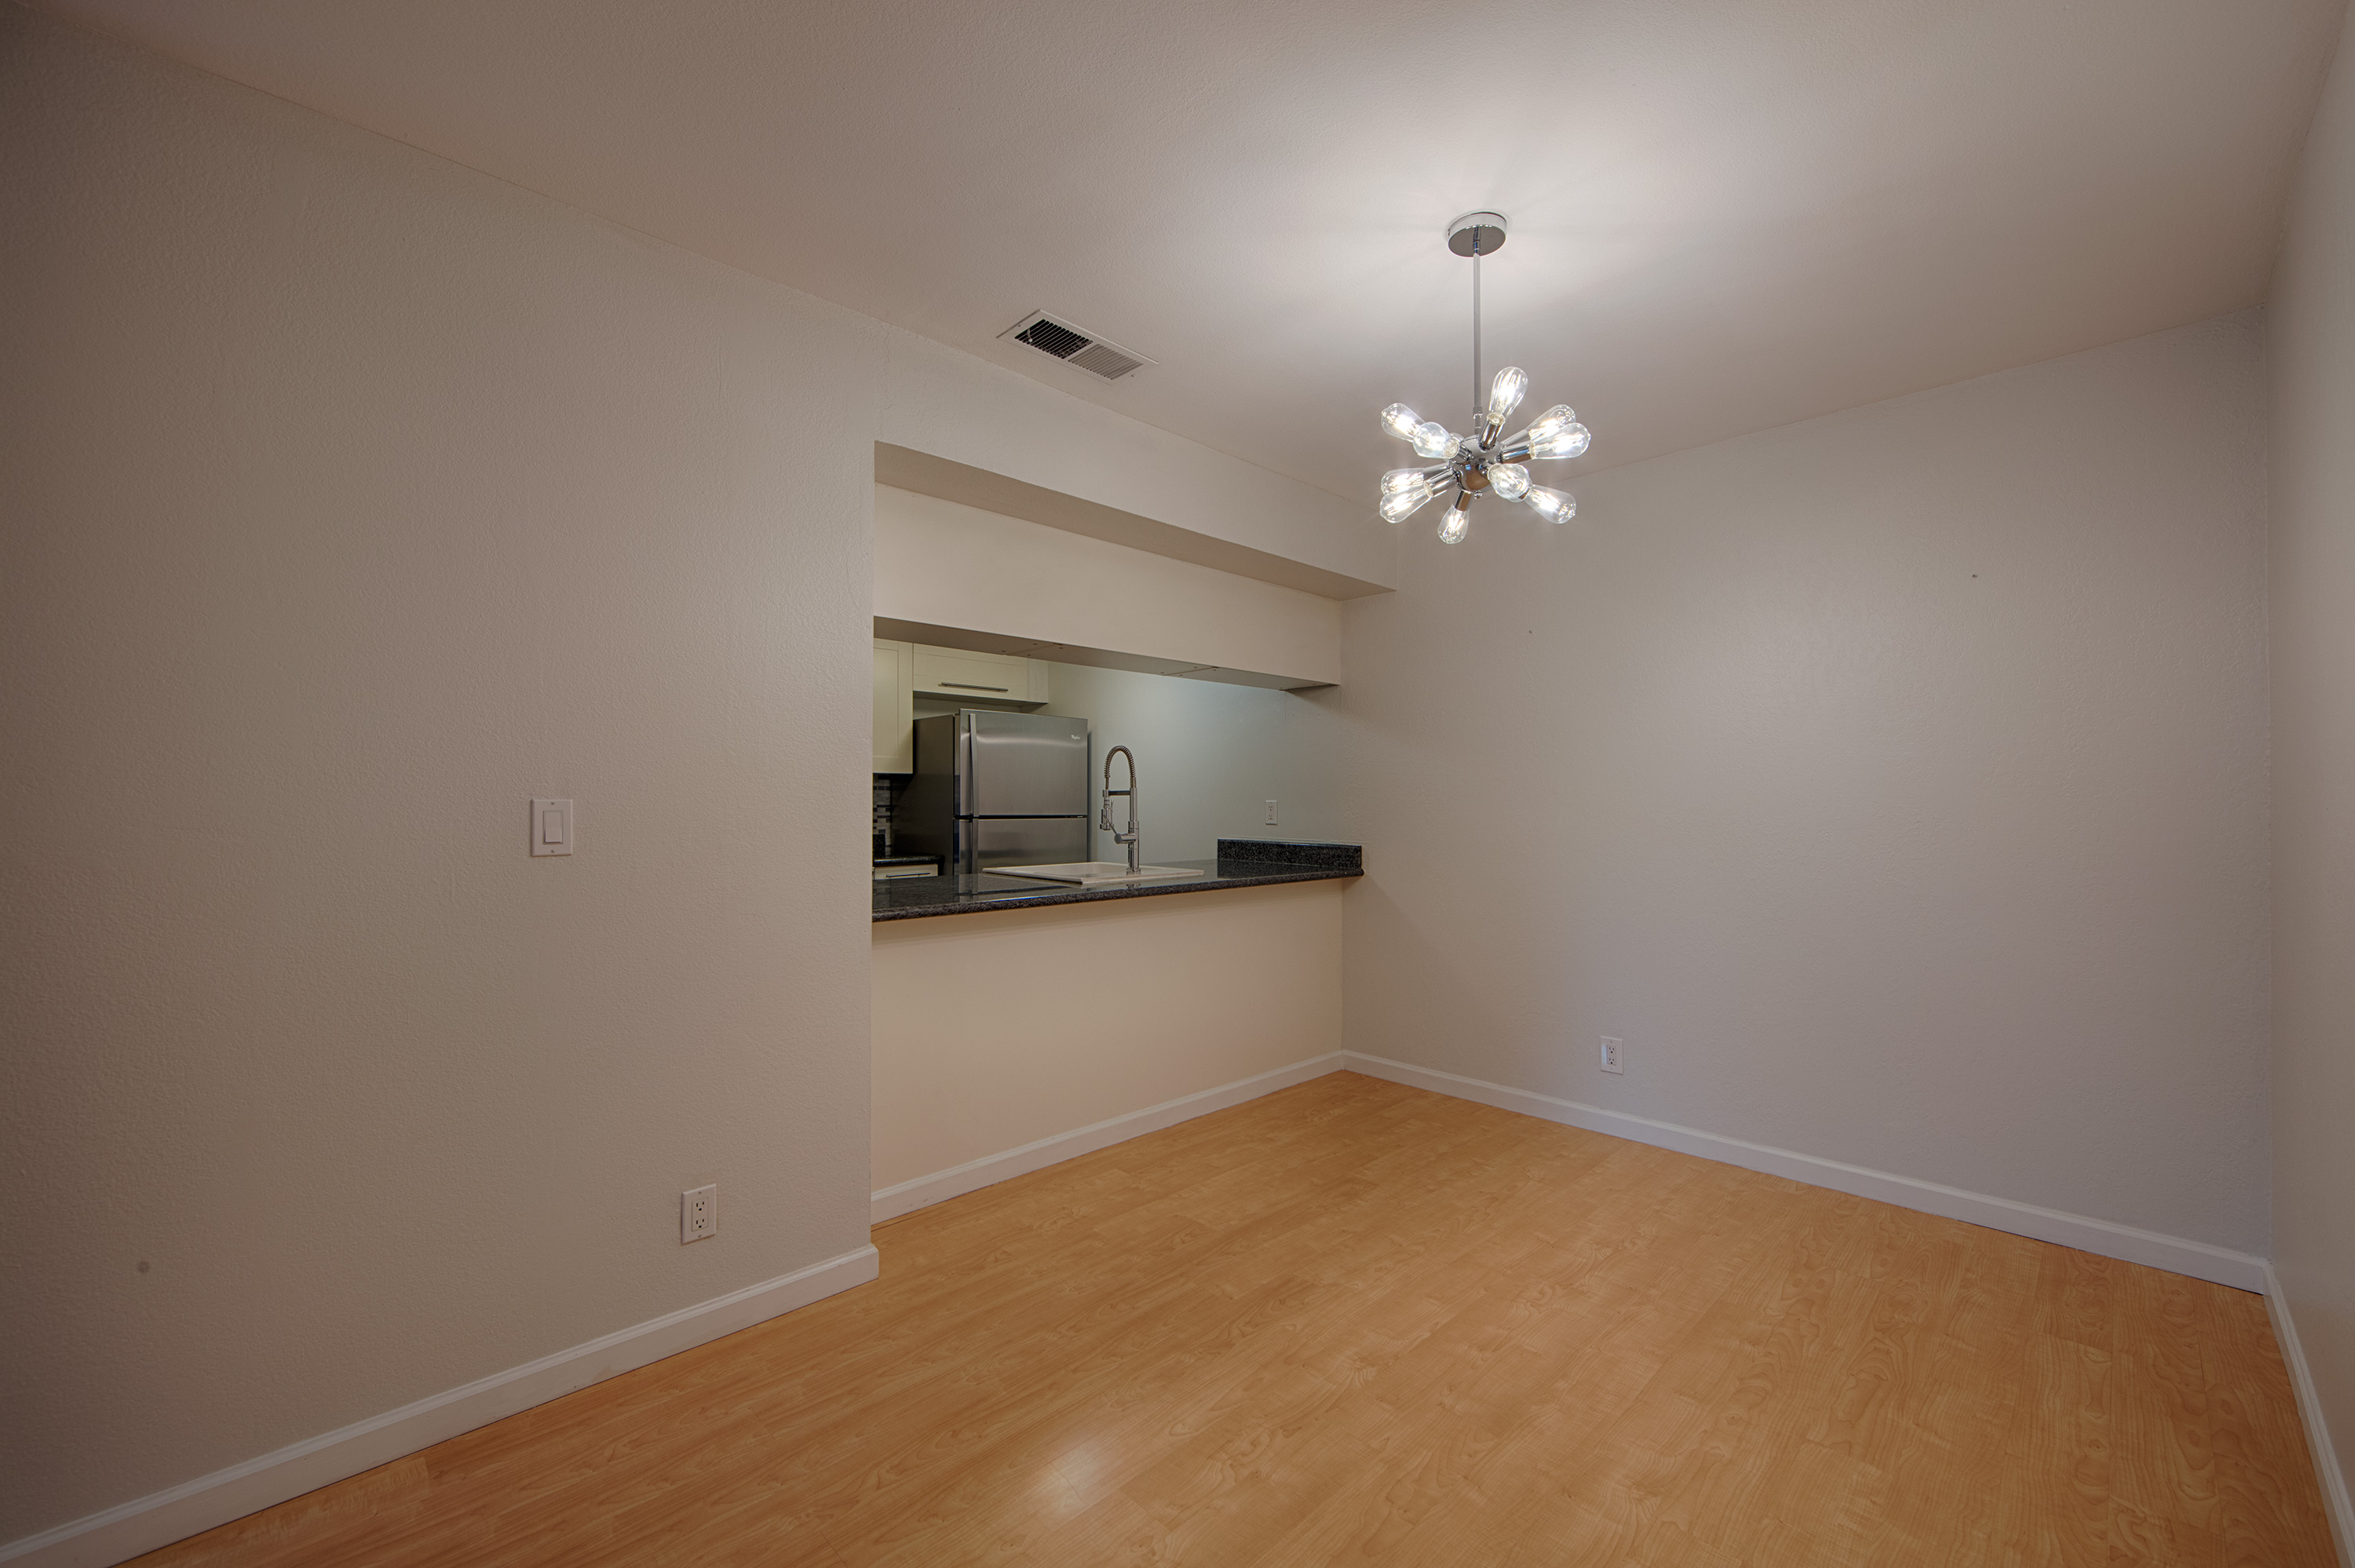 209 Red Oak Dr #Q, Sunnyvale 94086 - Dining Room (A)